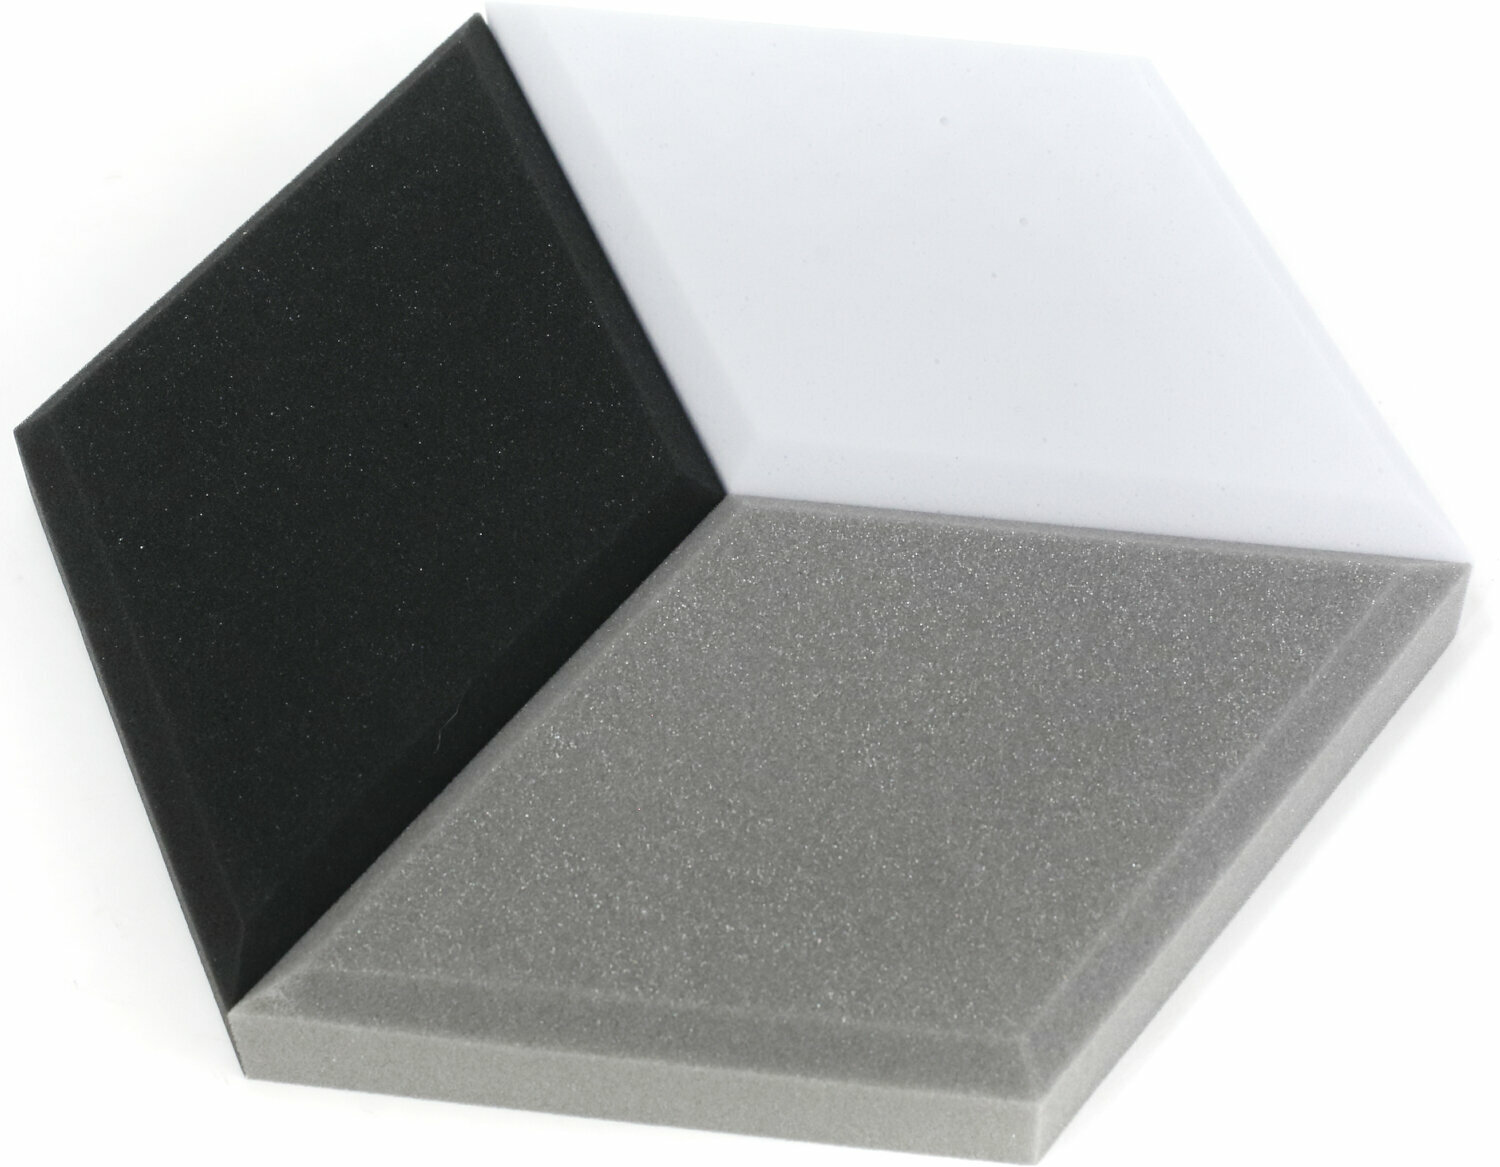 Chłonny panel piankowy Veles-X Acoustic Hexagon Anthracite